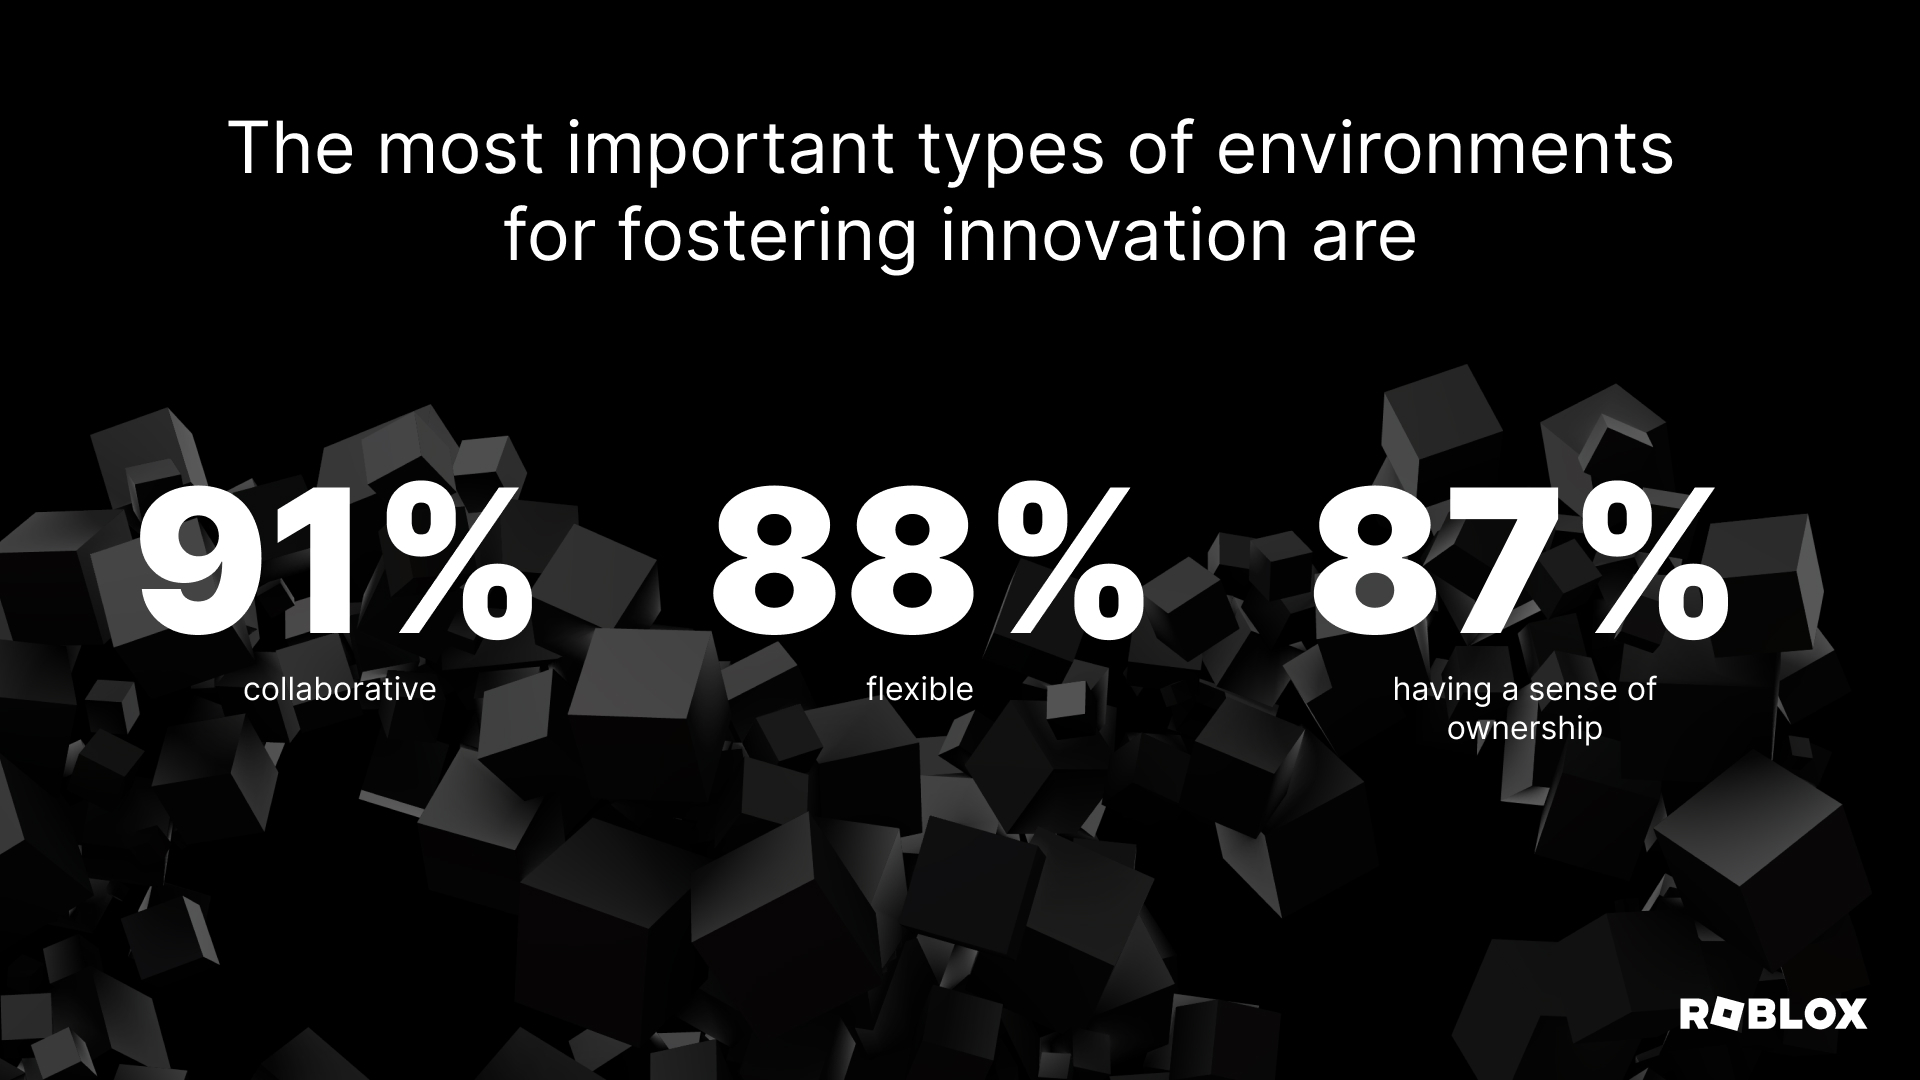 The most important types of environments for fostering innovation are: 91% collaborative, 88% flexible, 87% having a sense of ownership